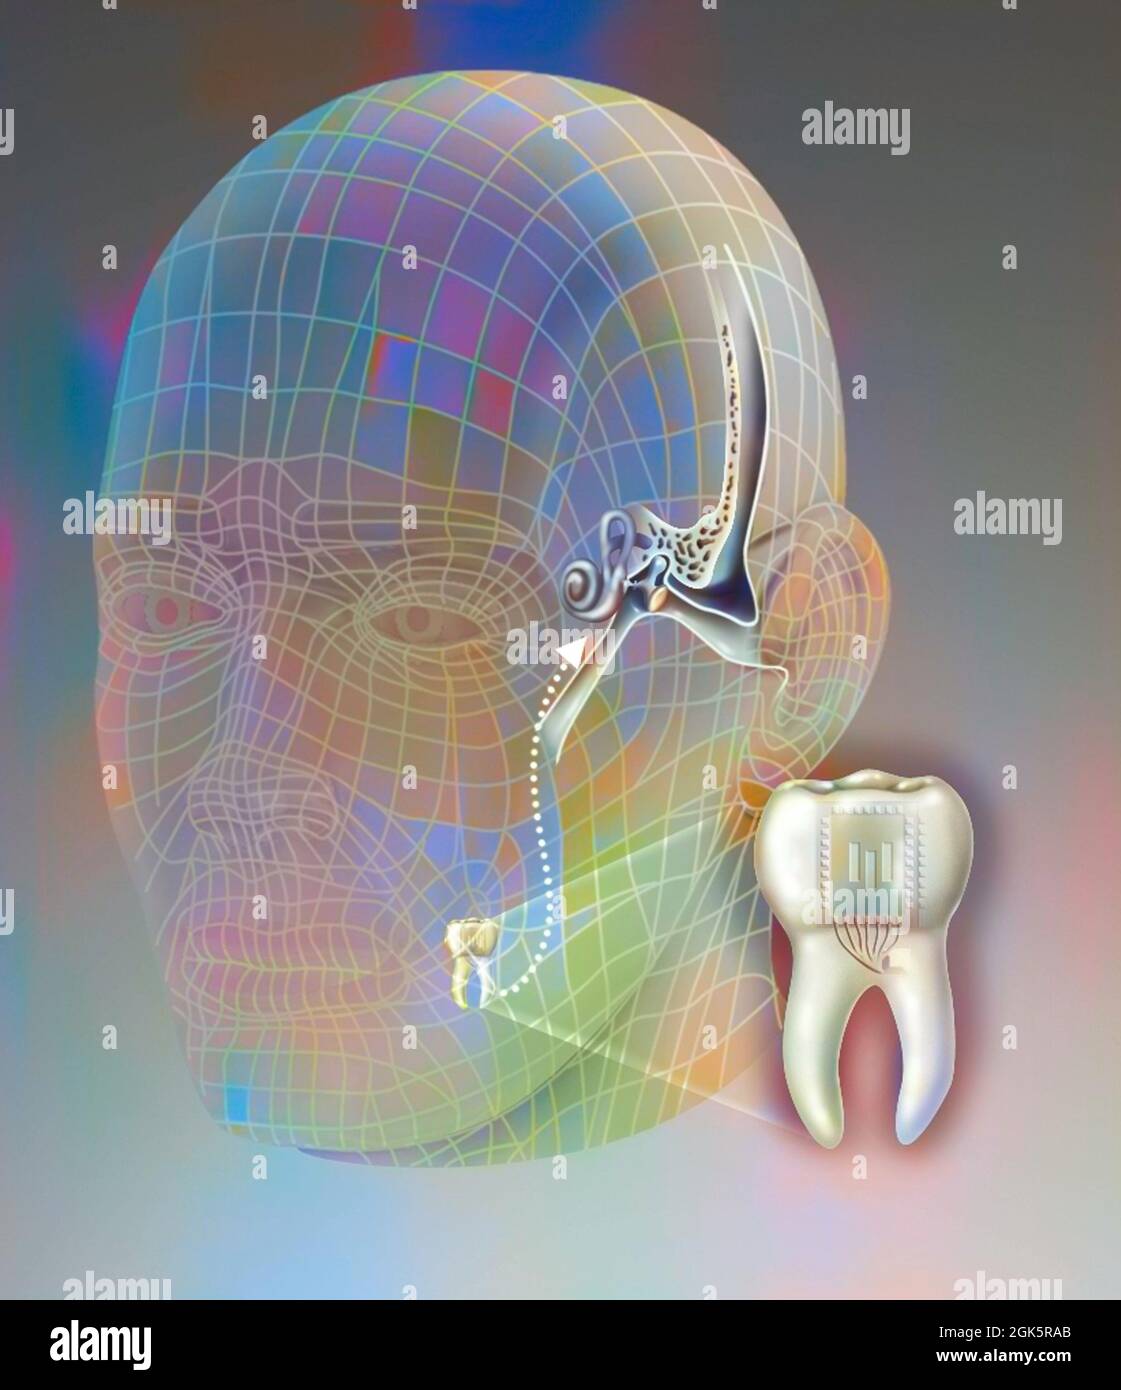 Principle of the dental telephone: sending waves from the tooth to the inner ear. Stock Photo